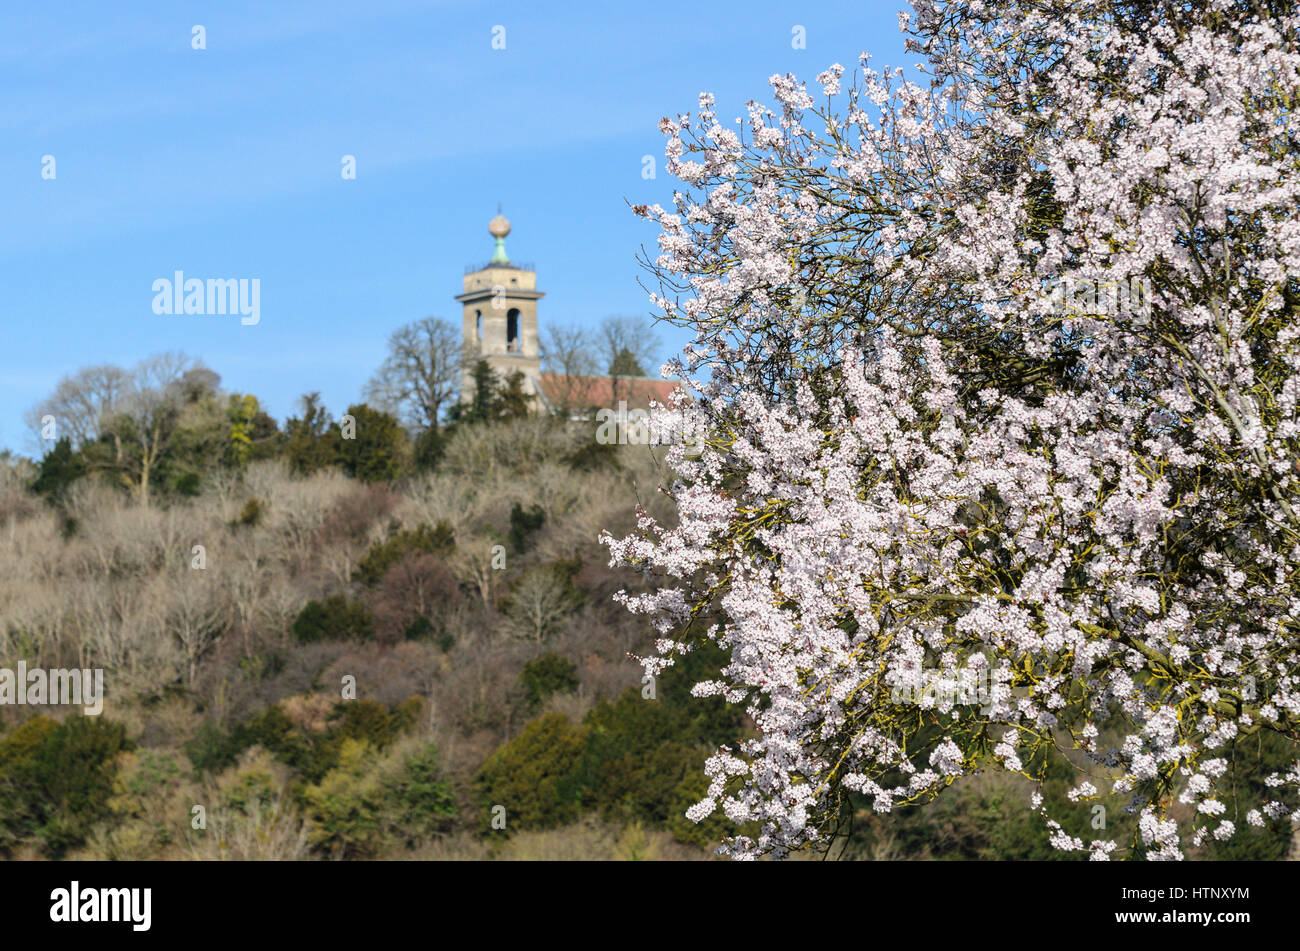 West Wycombe, UK. 13th March 2017. UK Weather. A warmer than average temperature was enjoyed in the Chiltern Hills today as blossom signals the onset of Spring. St Lawrence Church, West Wycombe, UK. on a warm spring day. Credit: Michael Winters/Alamy Live News Stock Photo